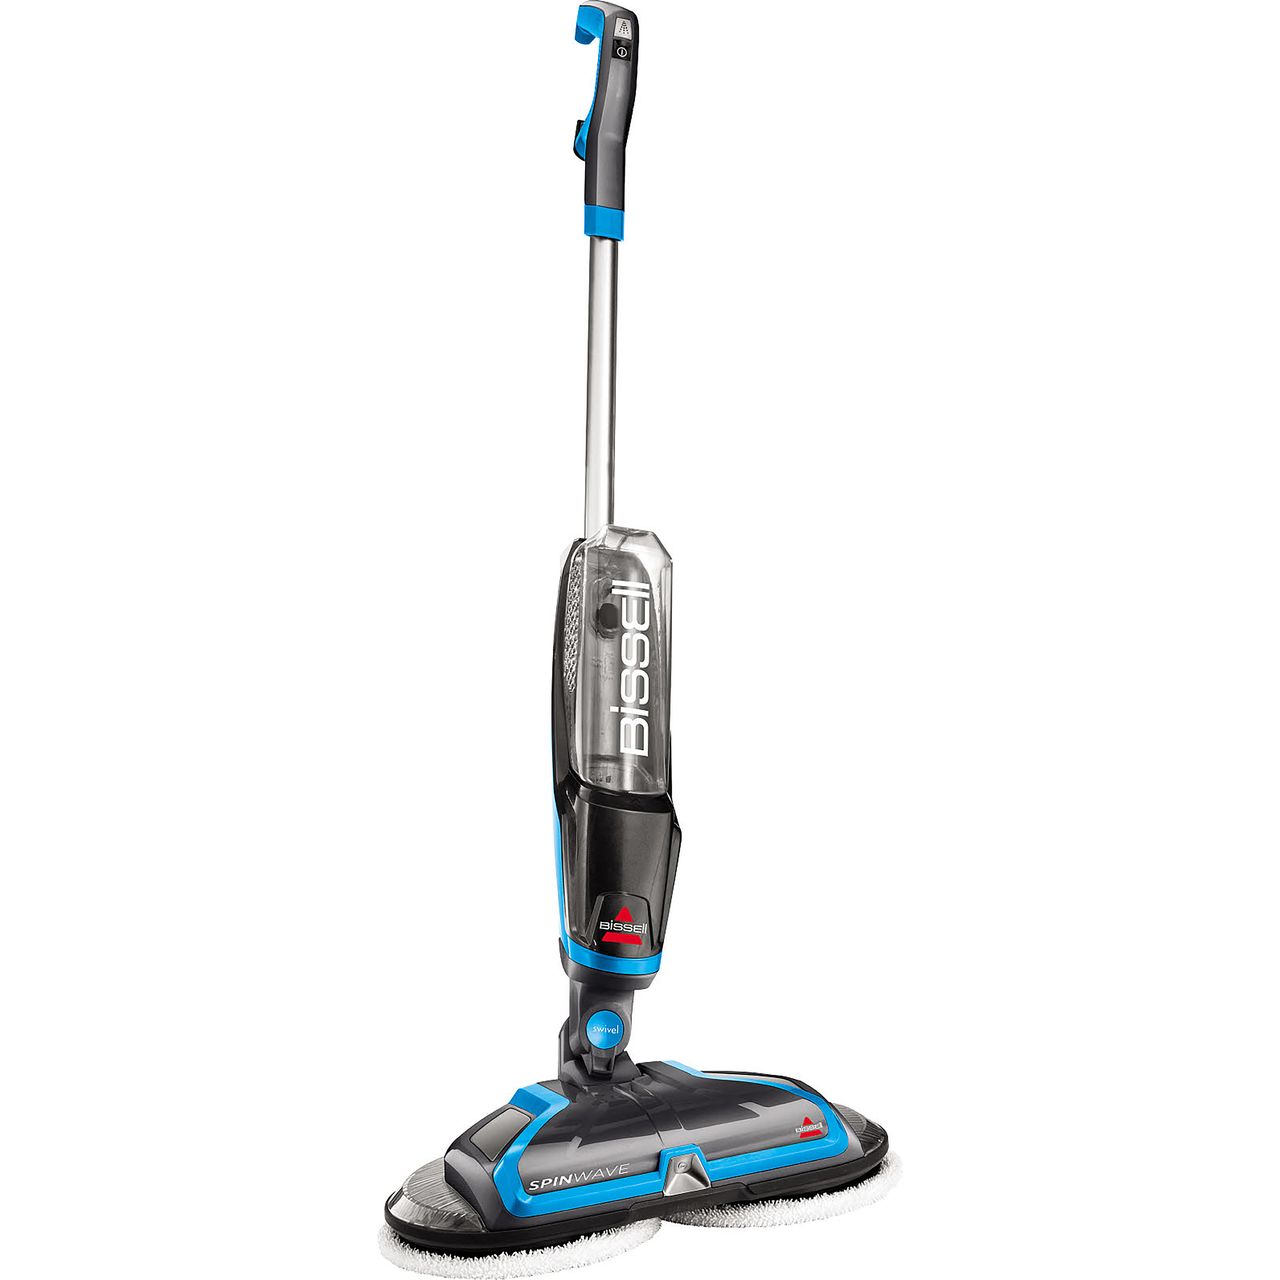 Bissell SpinWave 2052E Hard Floor Cleaner Review